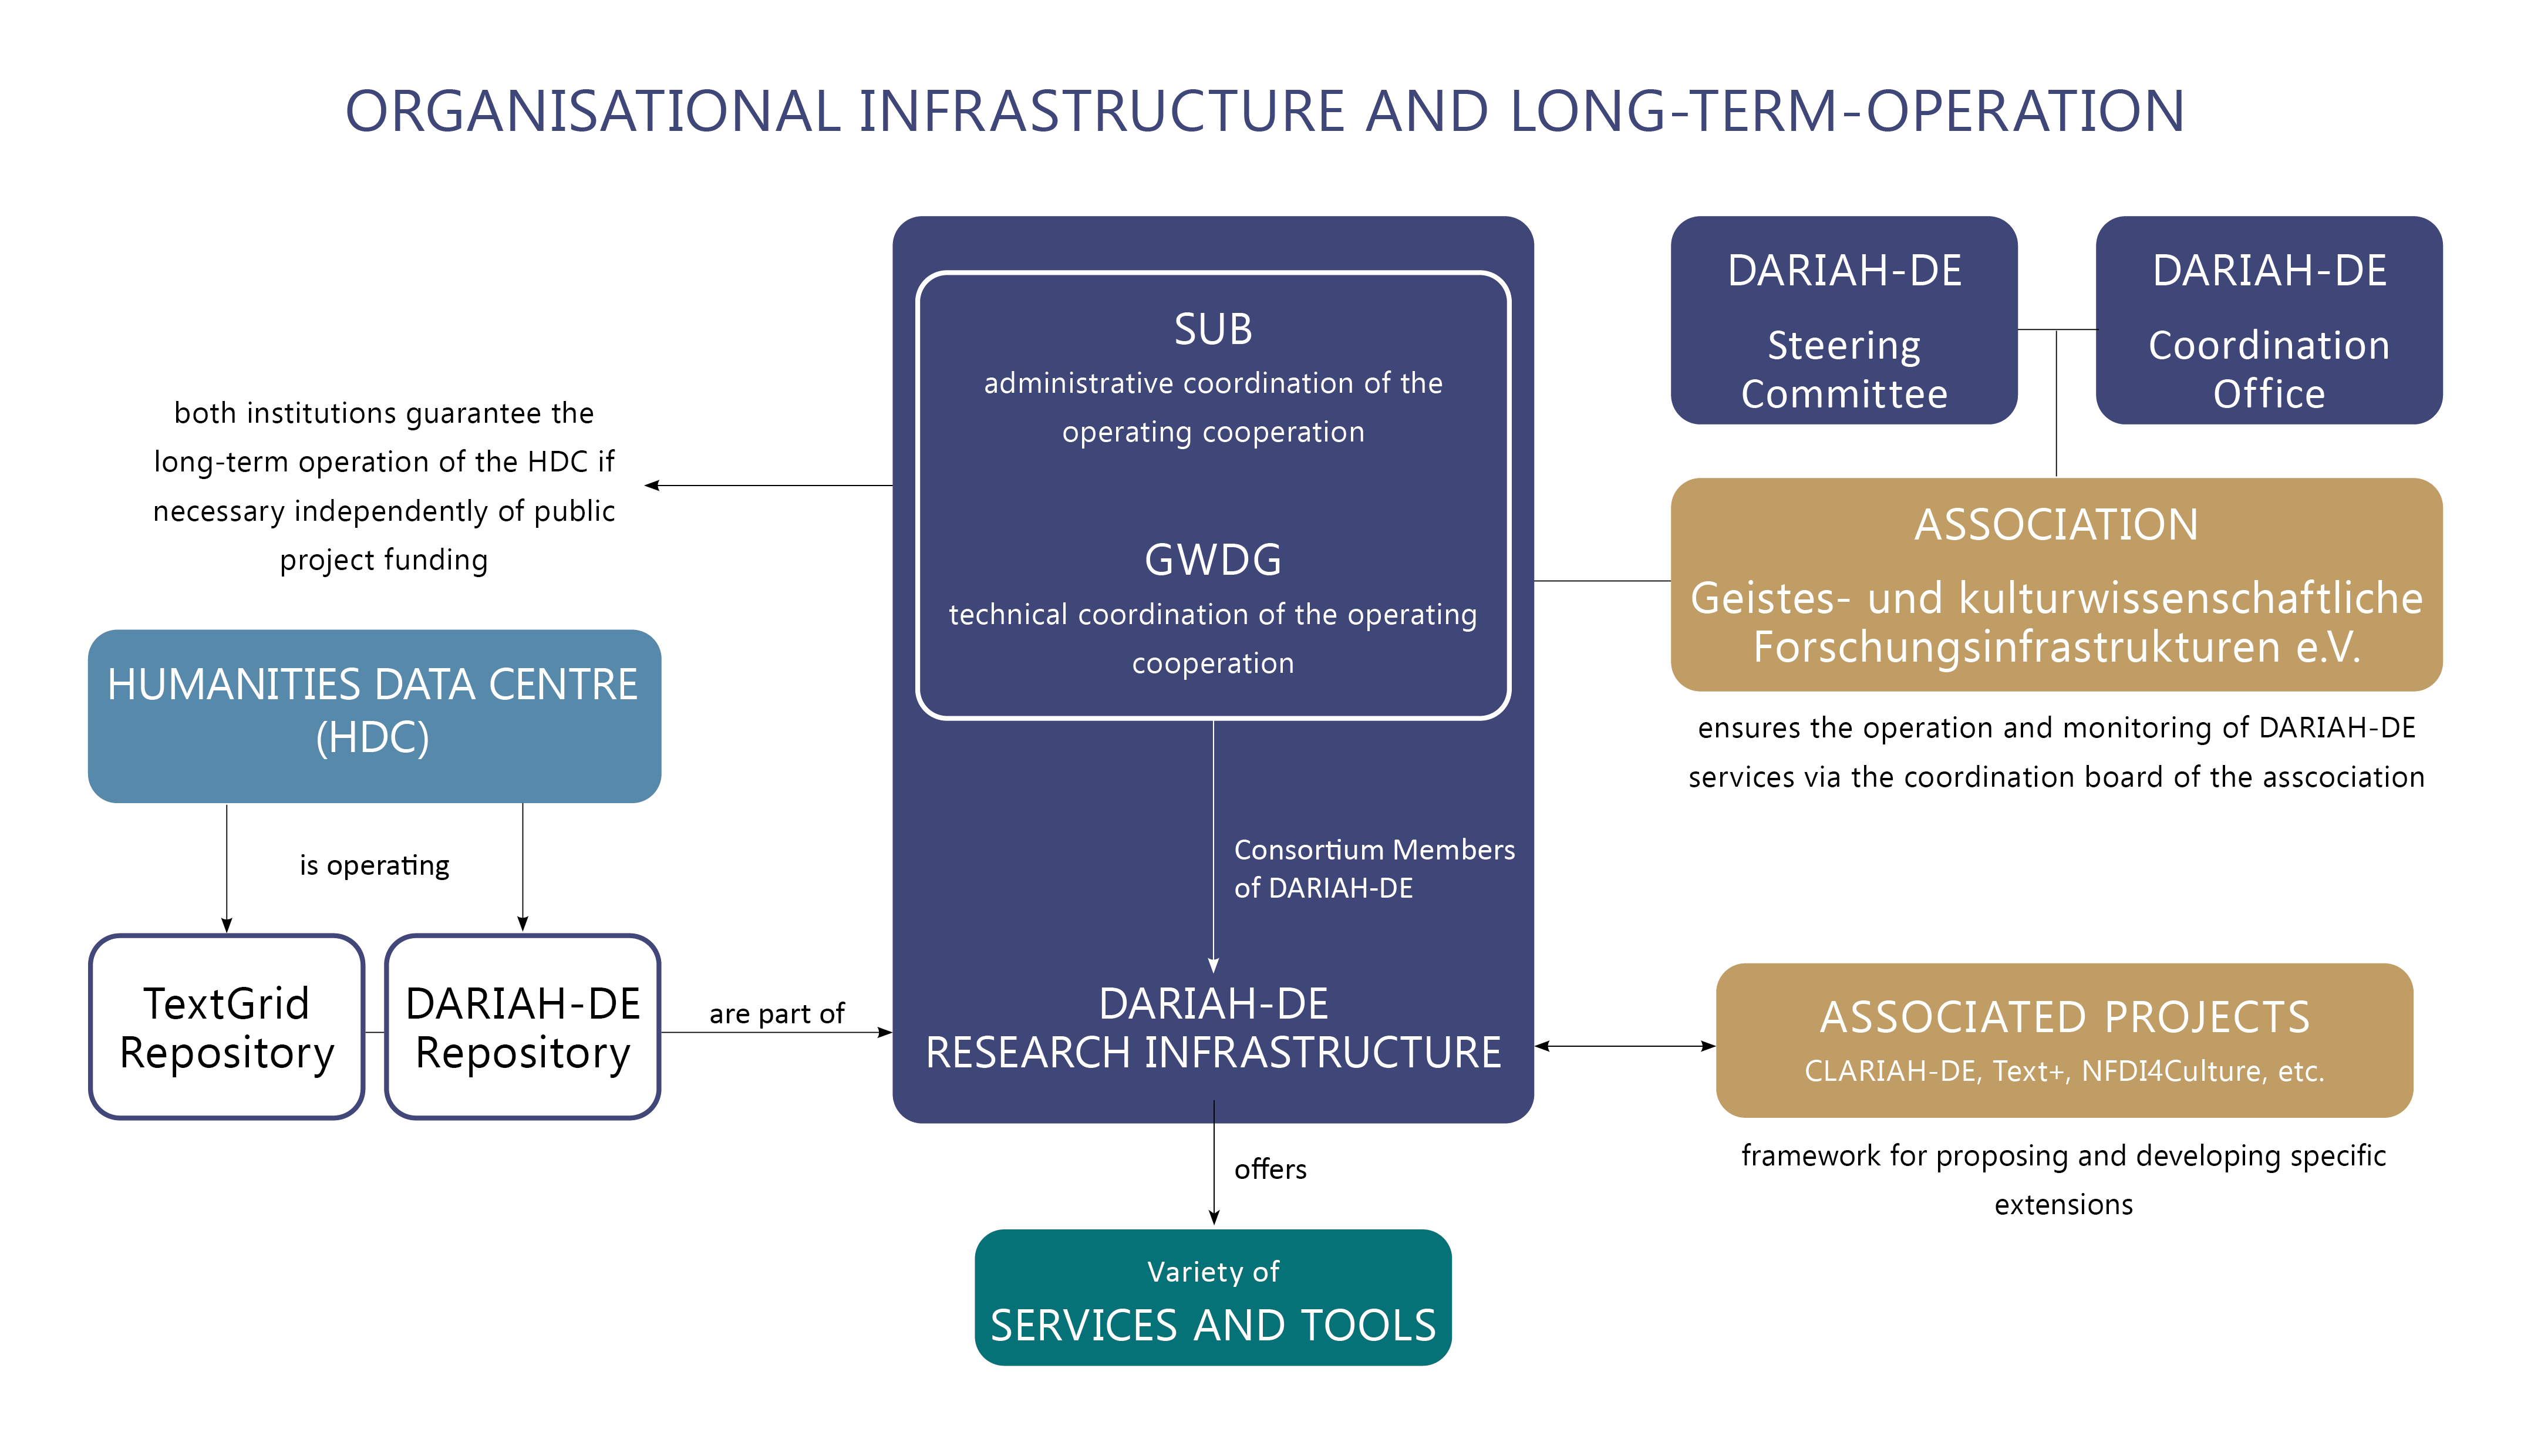 Fig. 1: Organisational Infrastructure and Long-Term-Operation of the DARIAH-DE Repository